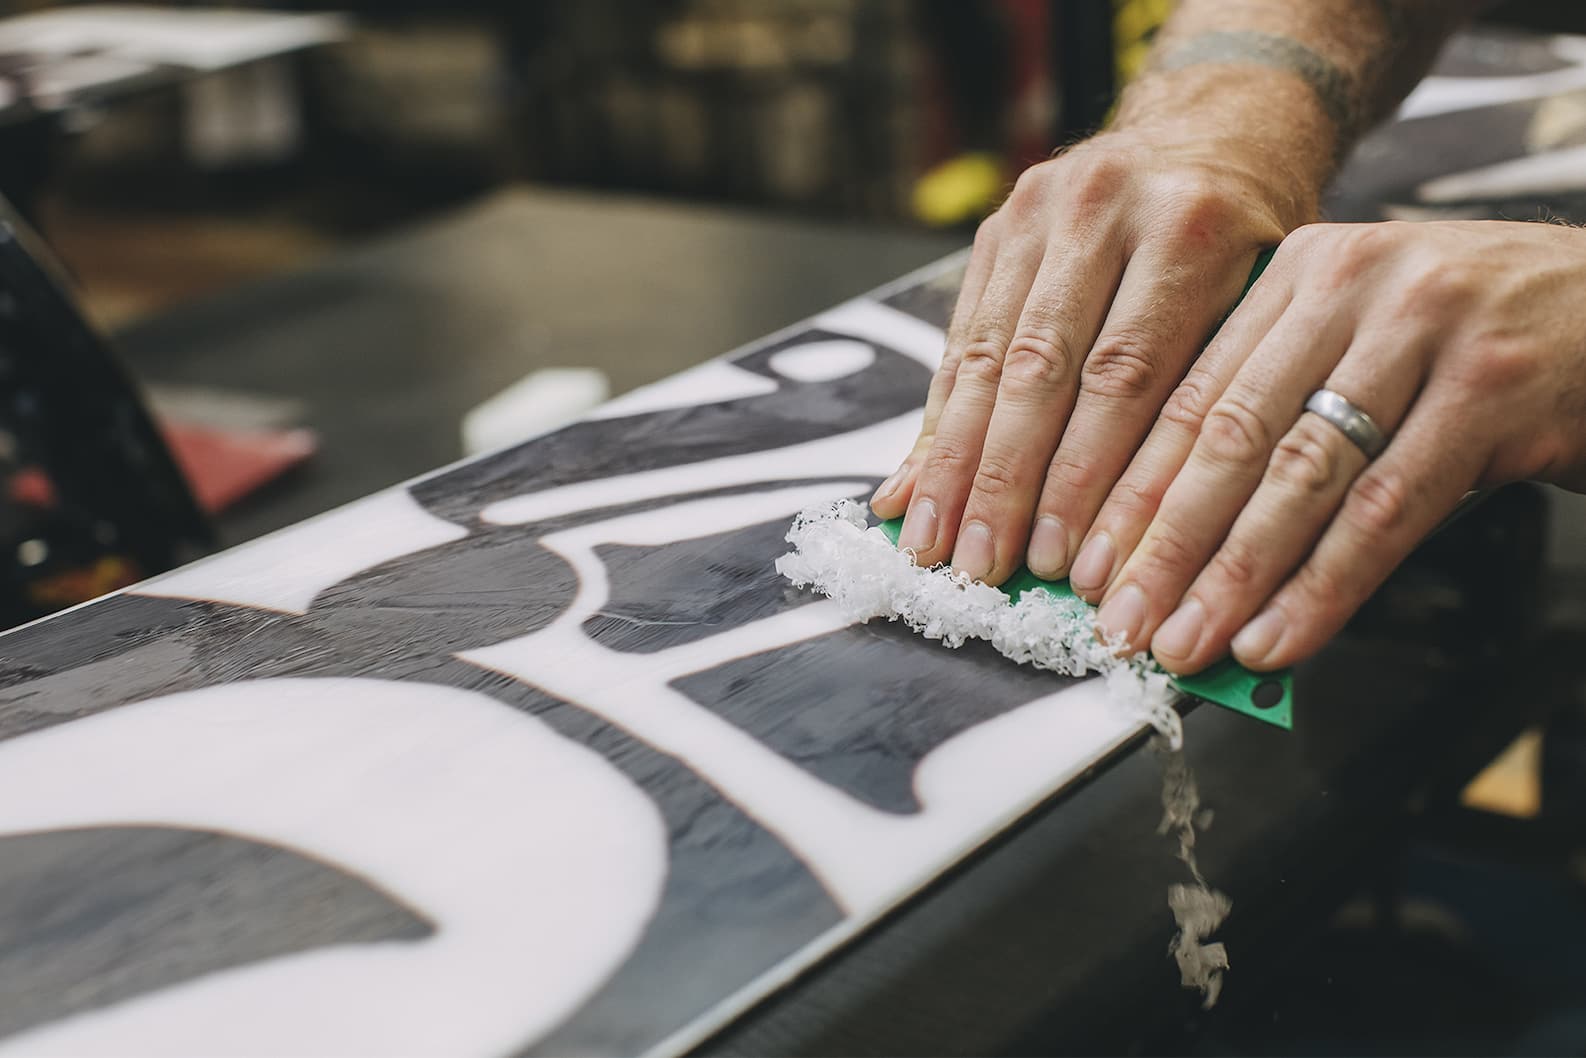 A simple how to wax your snowboard board tutorial from TransWorld  Snowboarding - Snowboarder